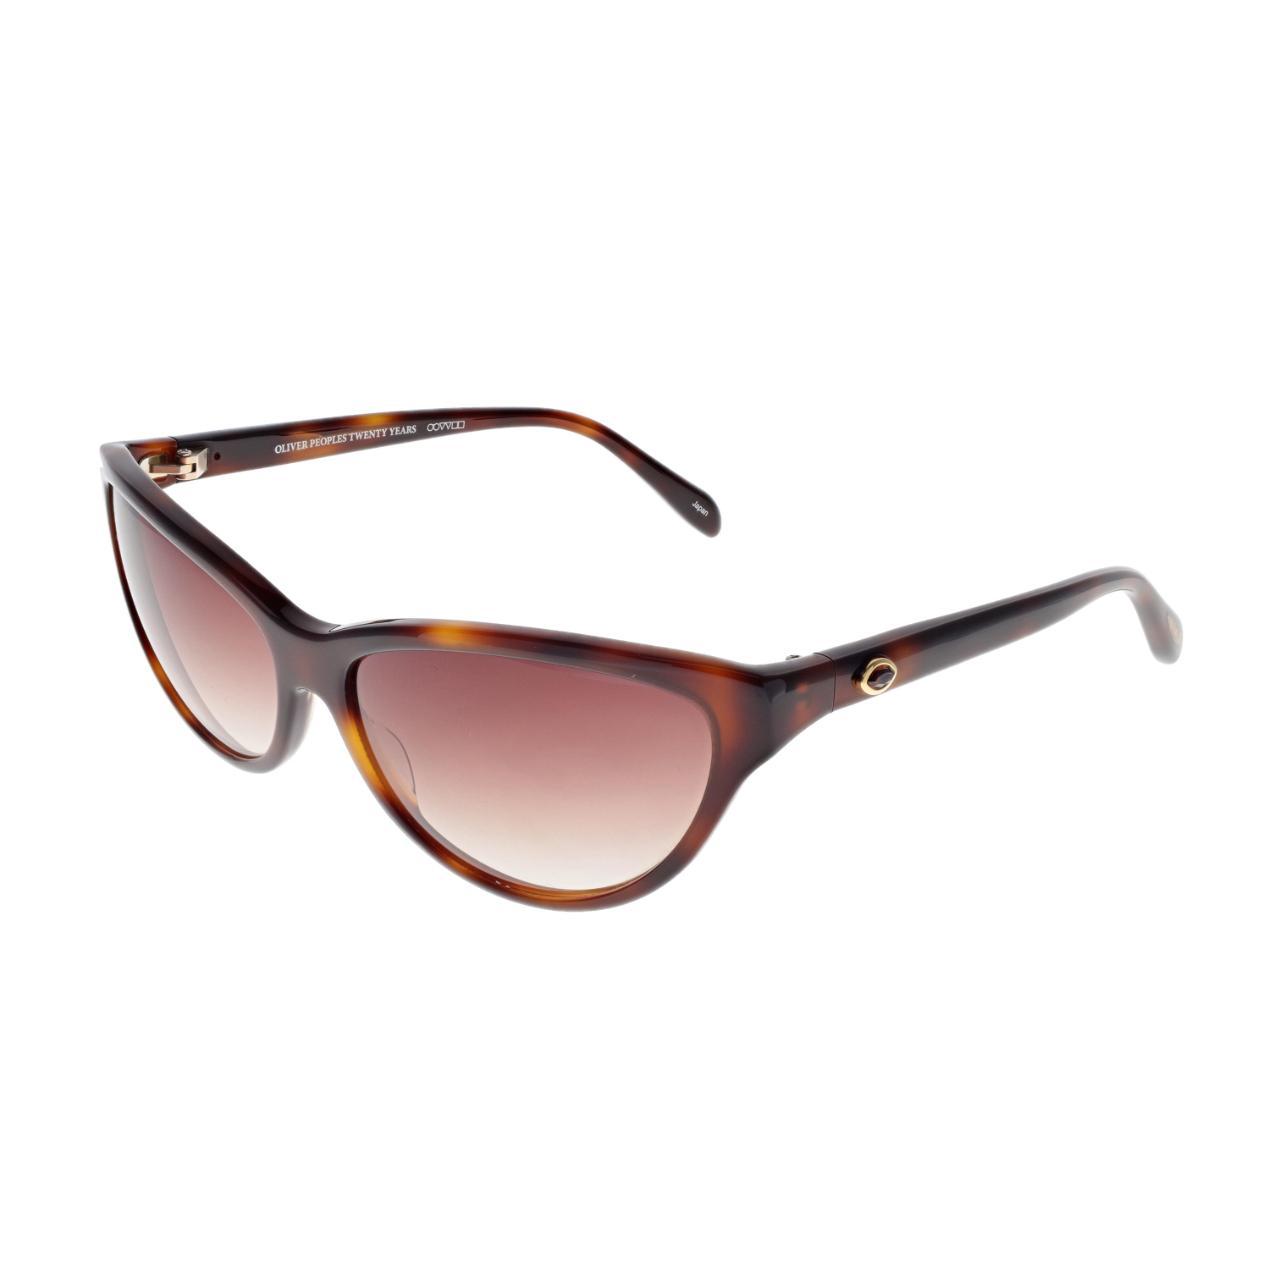 Oliver Peoples Women's Brown Sunglasses